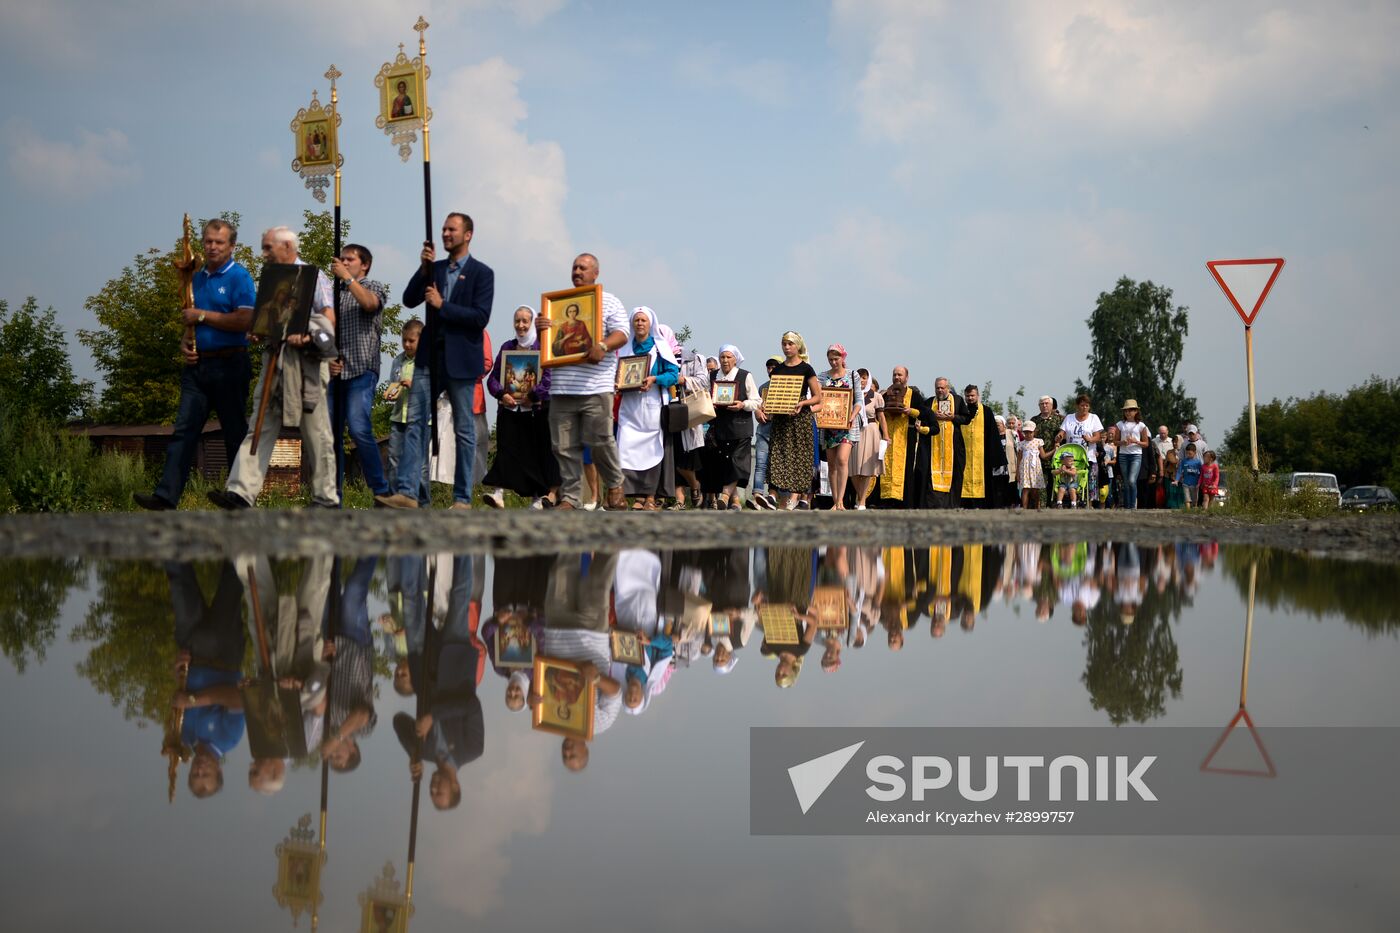 Baptism of Russia anniversary across Russia